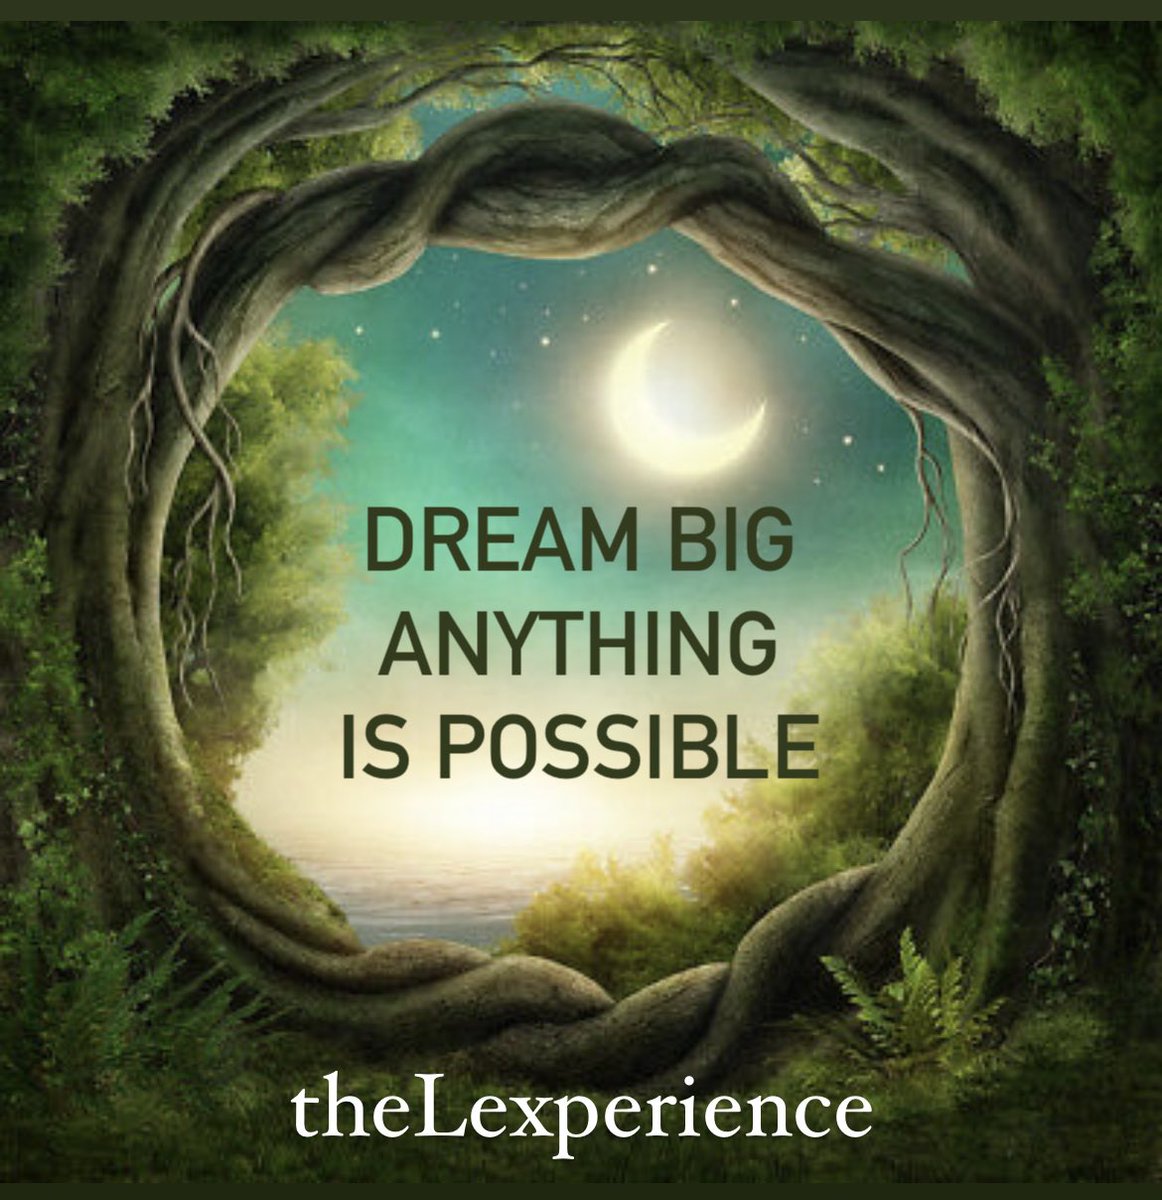 You are in charge of your destiny so dream BIG anything is possible!

#mondaymotivation #dreambig #makeithappen #positivevibes #inspirational #inspiring #lifeofadventure #theLexperience